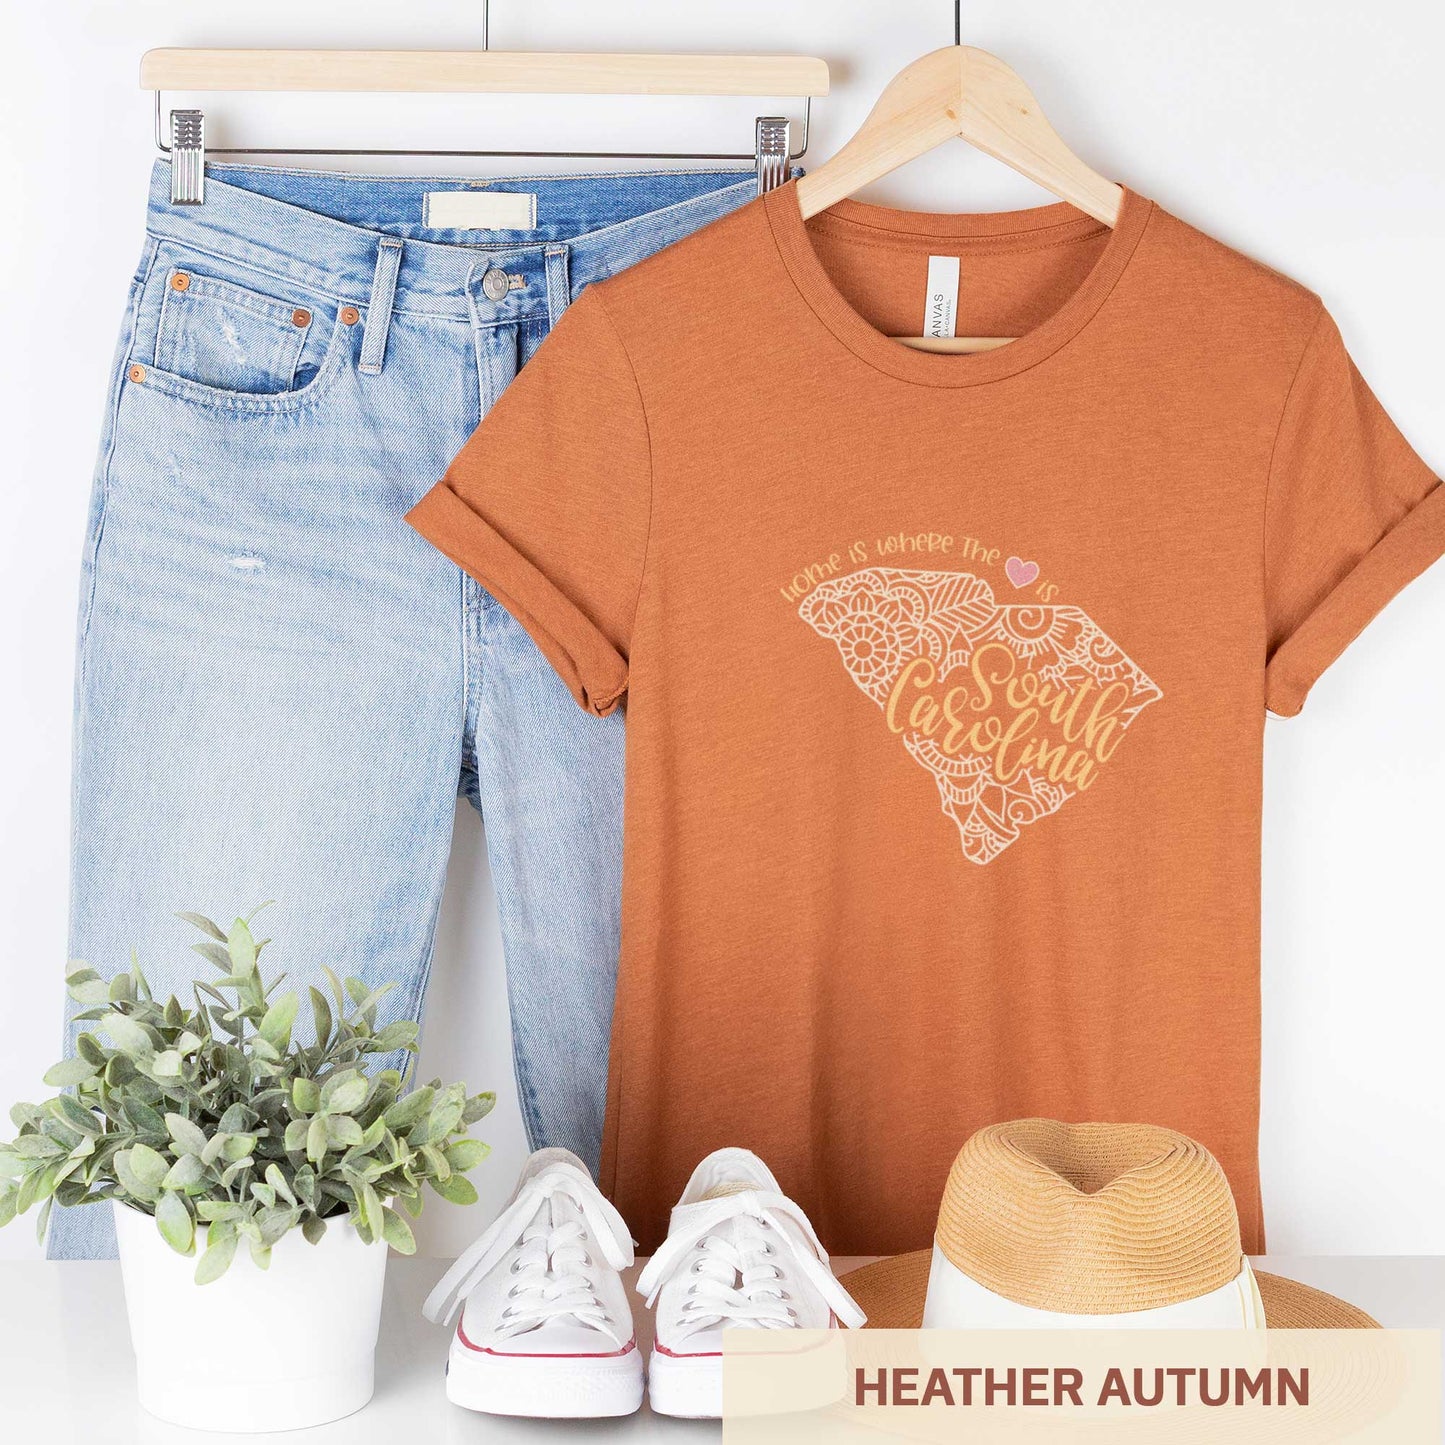 A hanging heather autumn Bella Canvas t-shirt featuring a mandala in the shape of South Carolina with the words home is where the heart is.